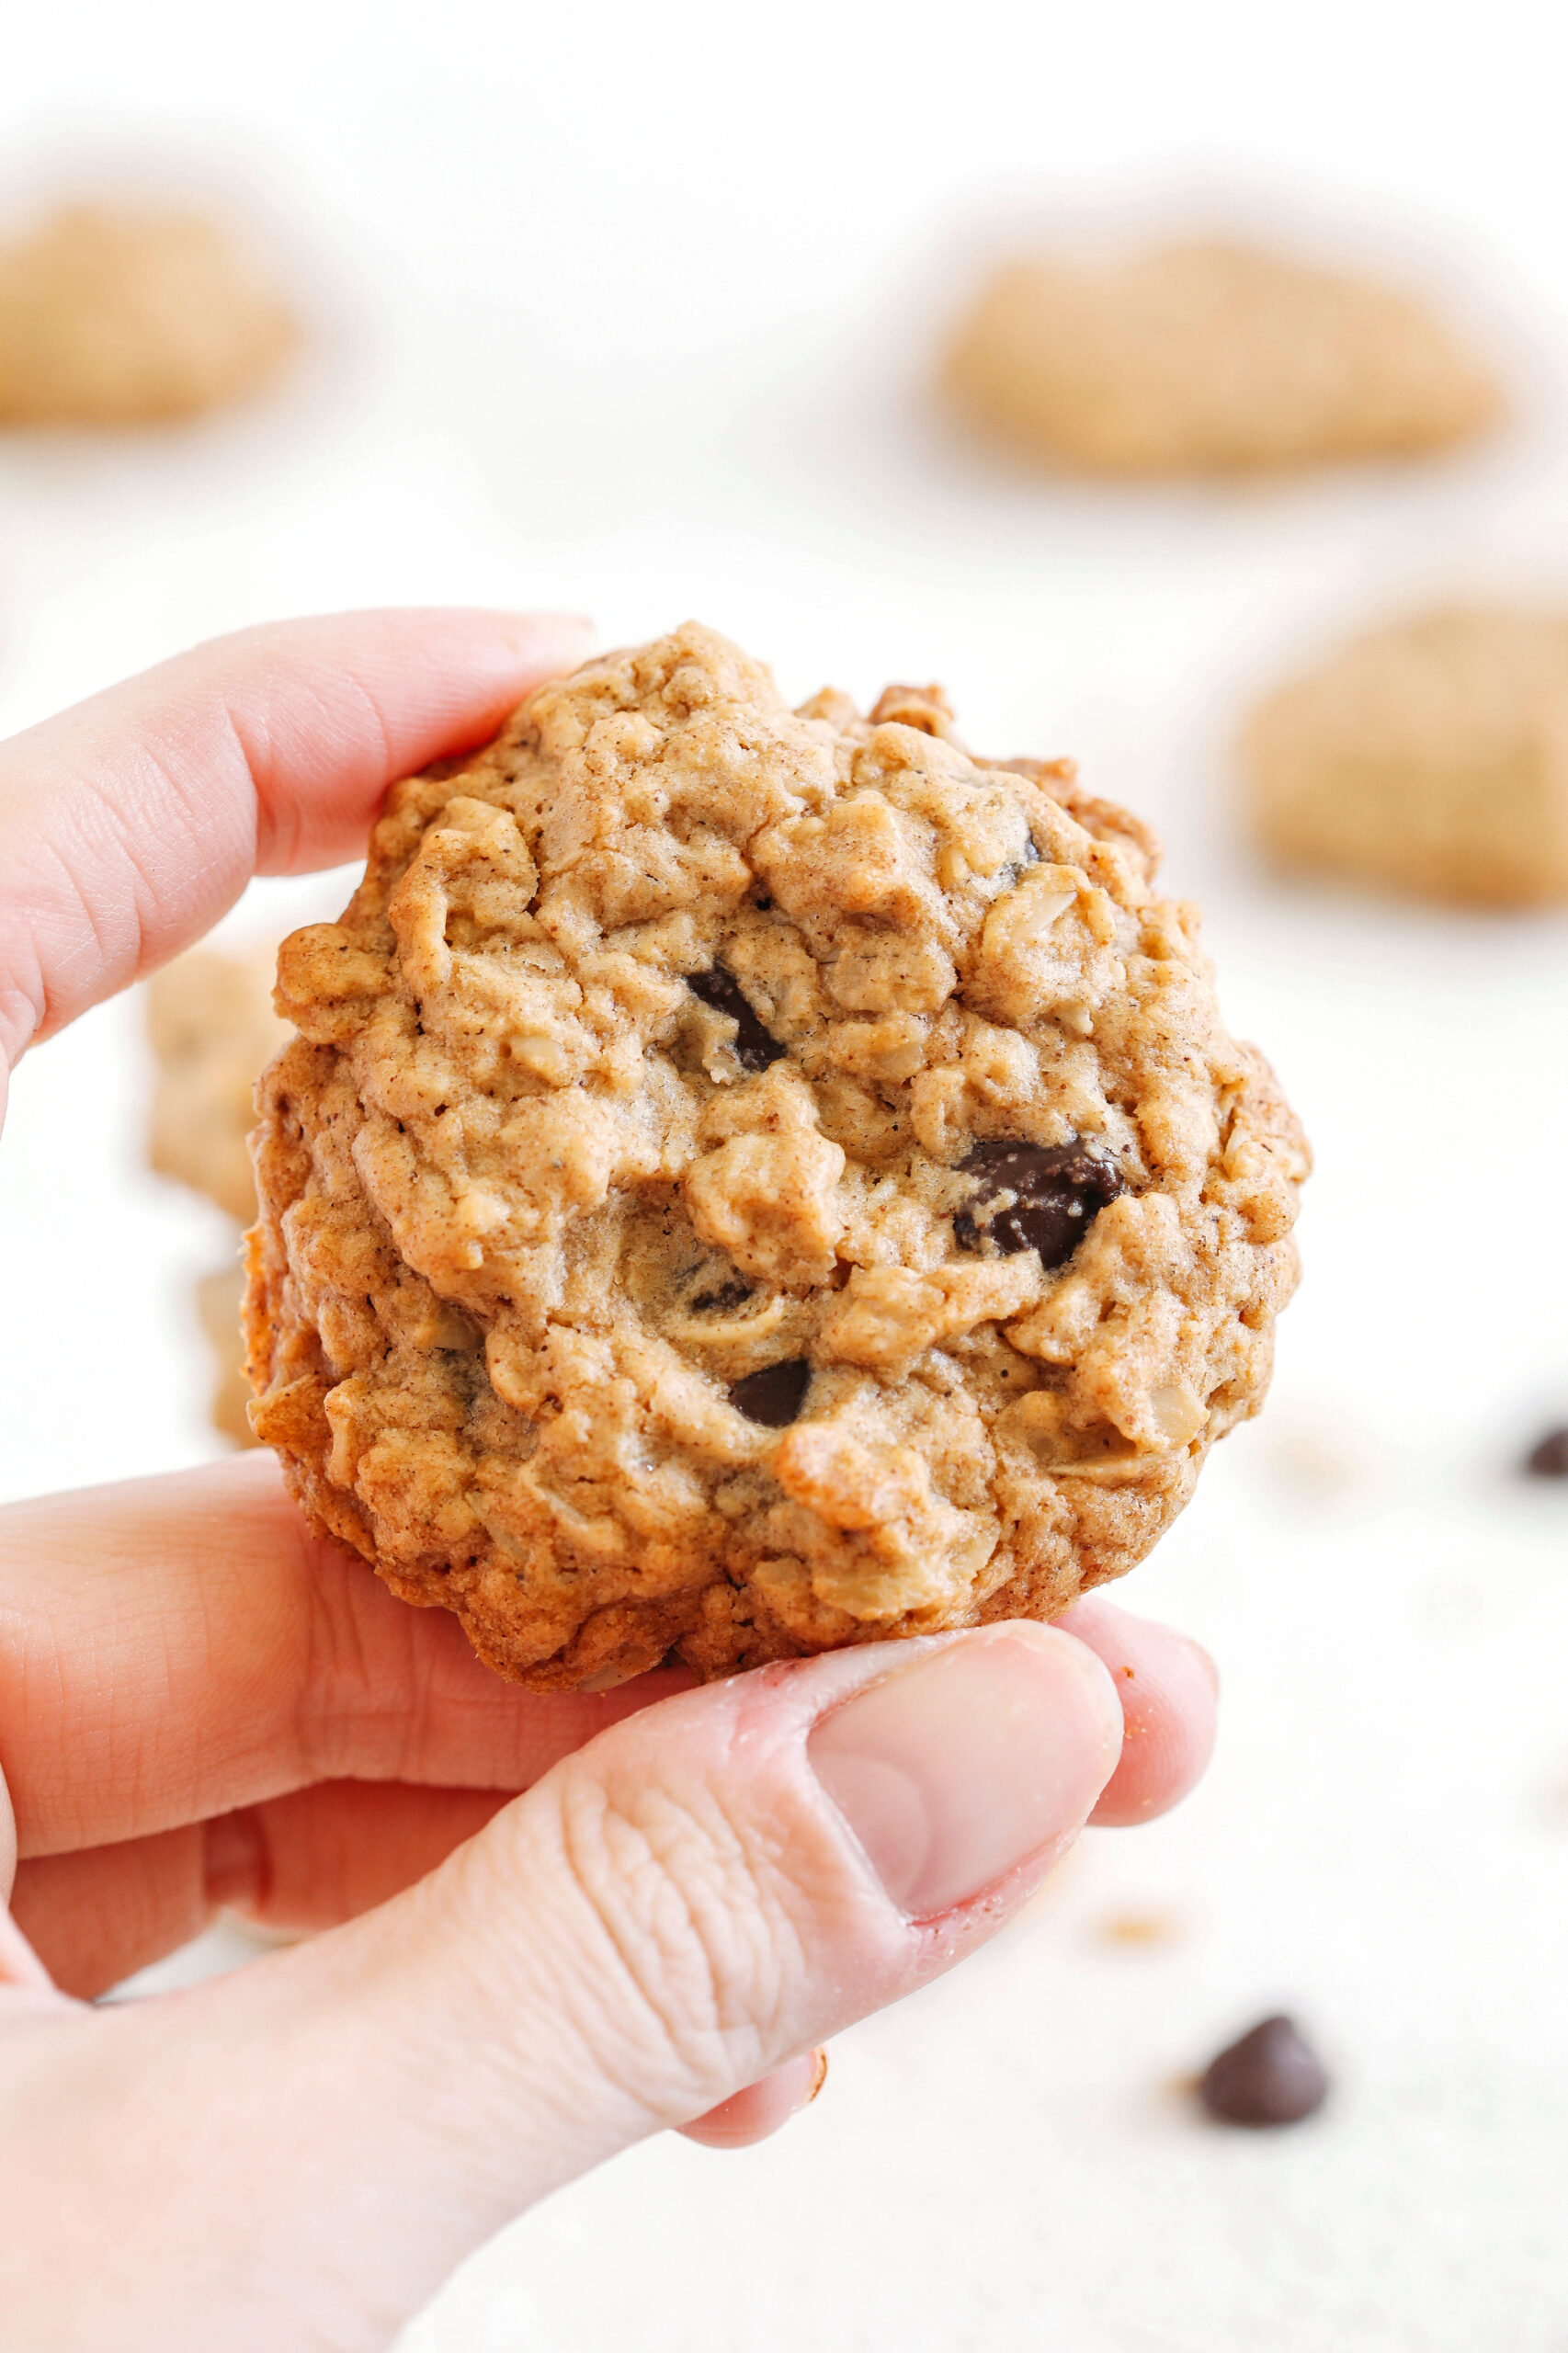 Soft and chewy Peanut Butter Oatmeal Cookies made healthier with wholesome ingredients, zero butter or refined sugar, and delicious chunks of chocolate in every bite! 